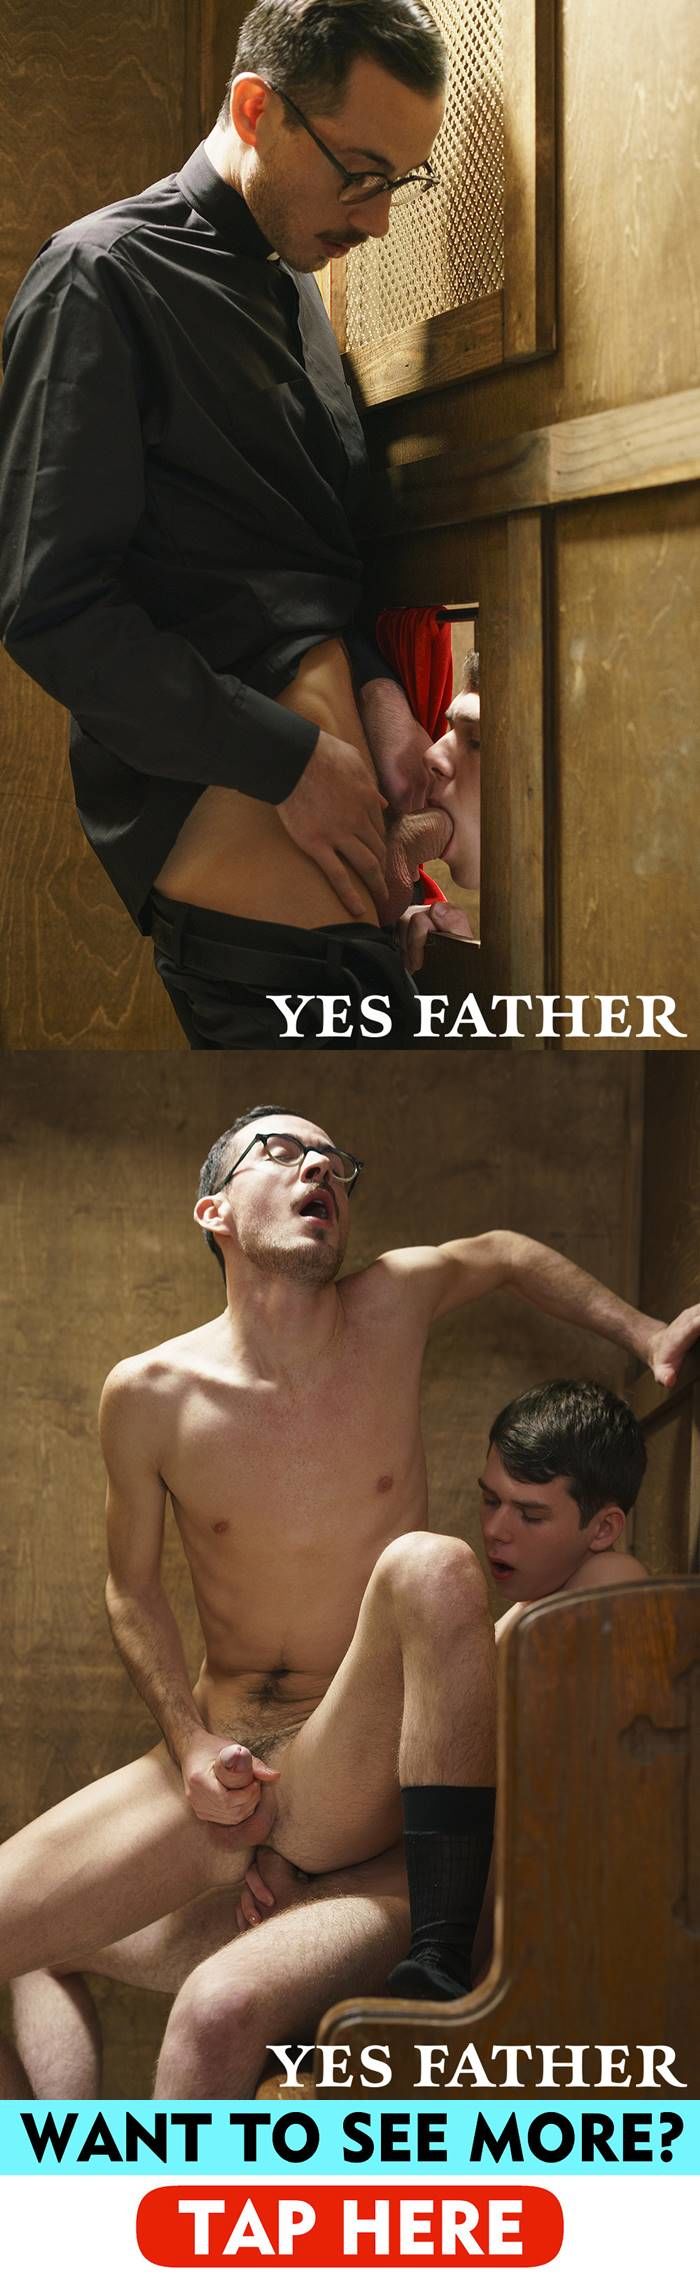 Yes Father: Dakota Lovell & Father Fiore 1